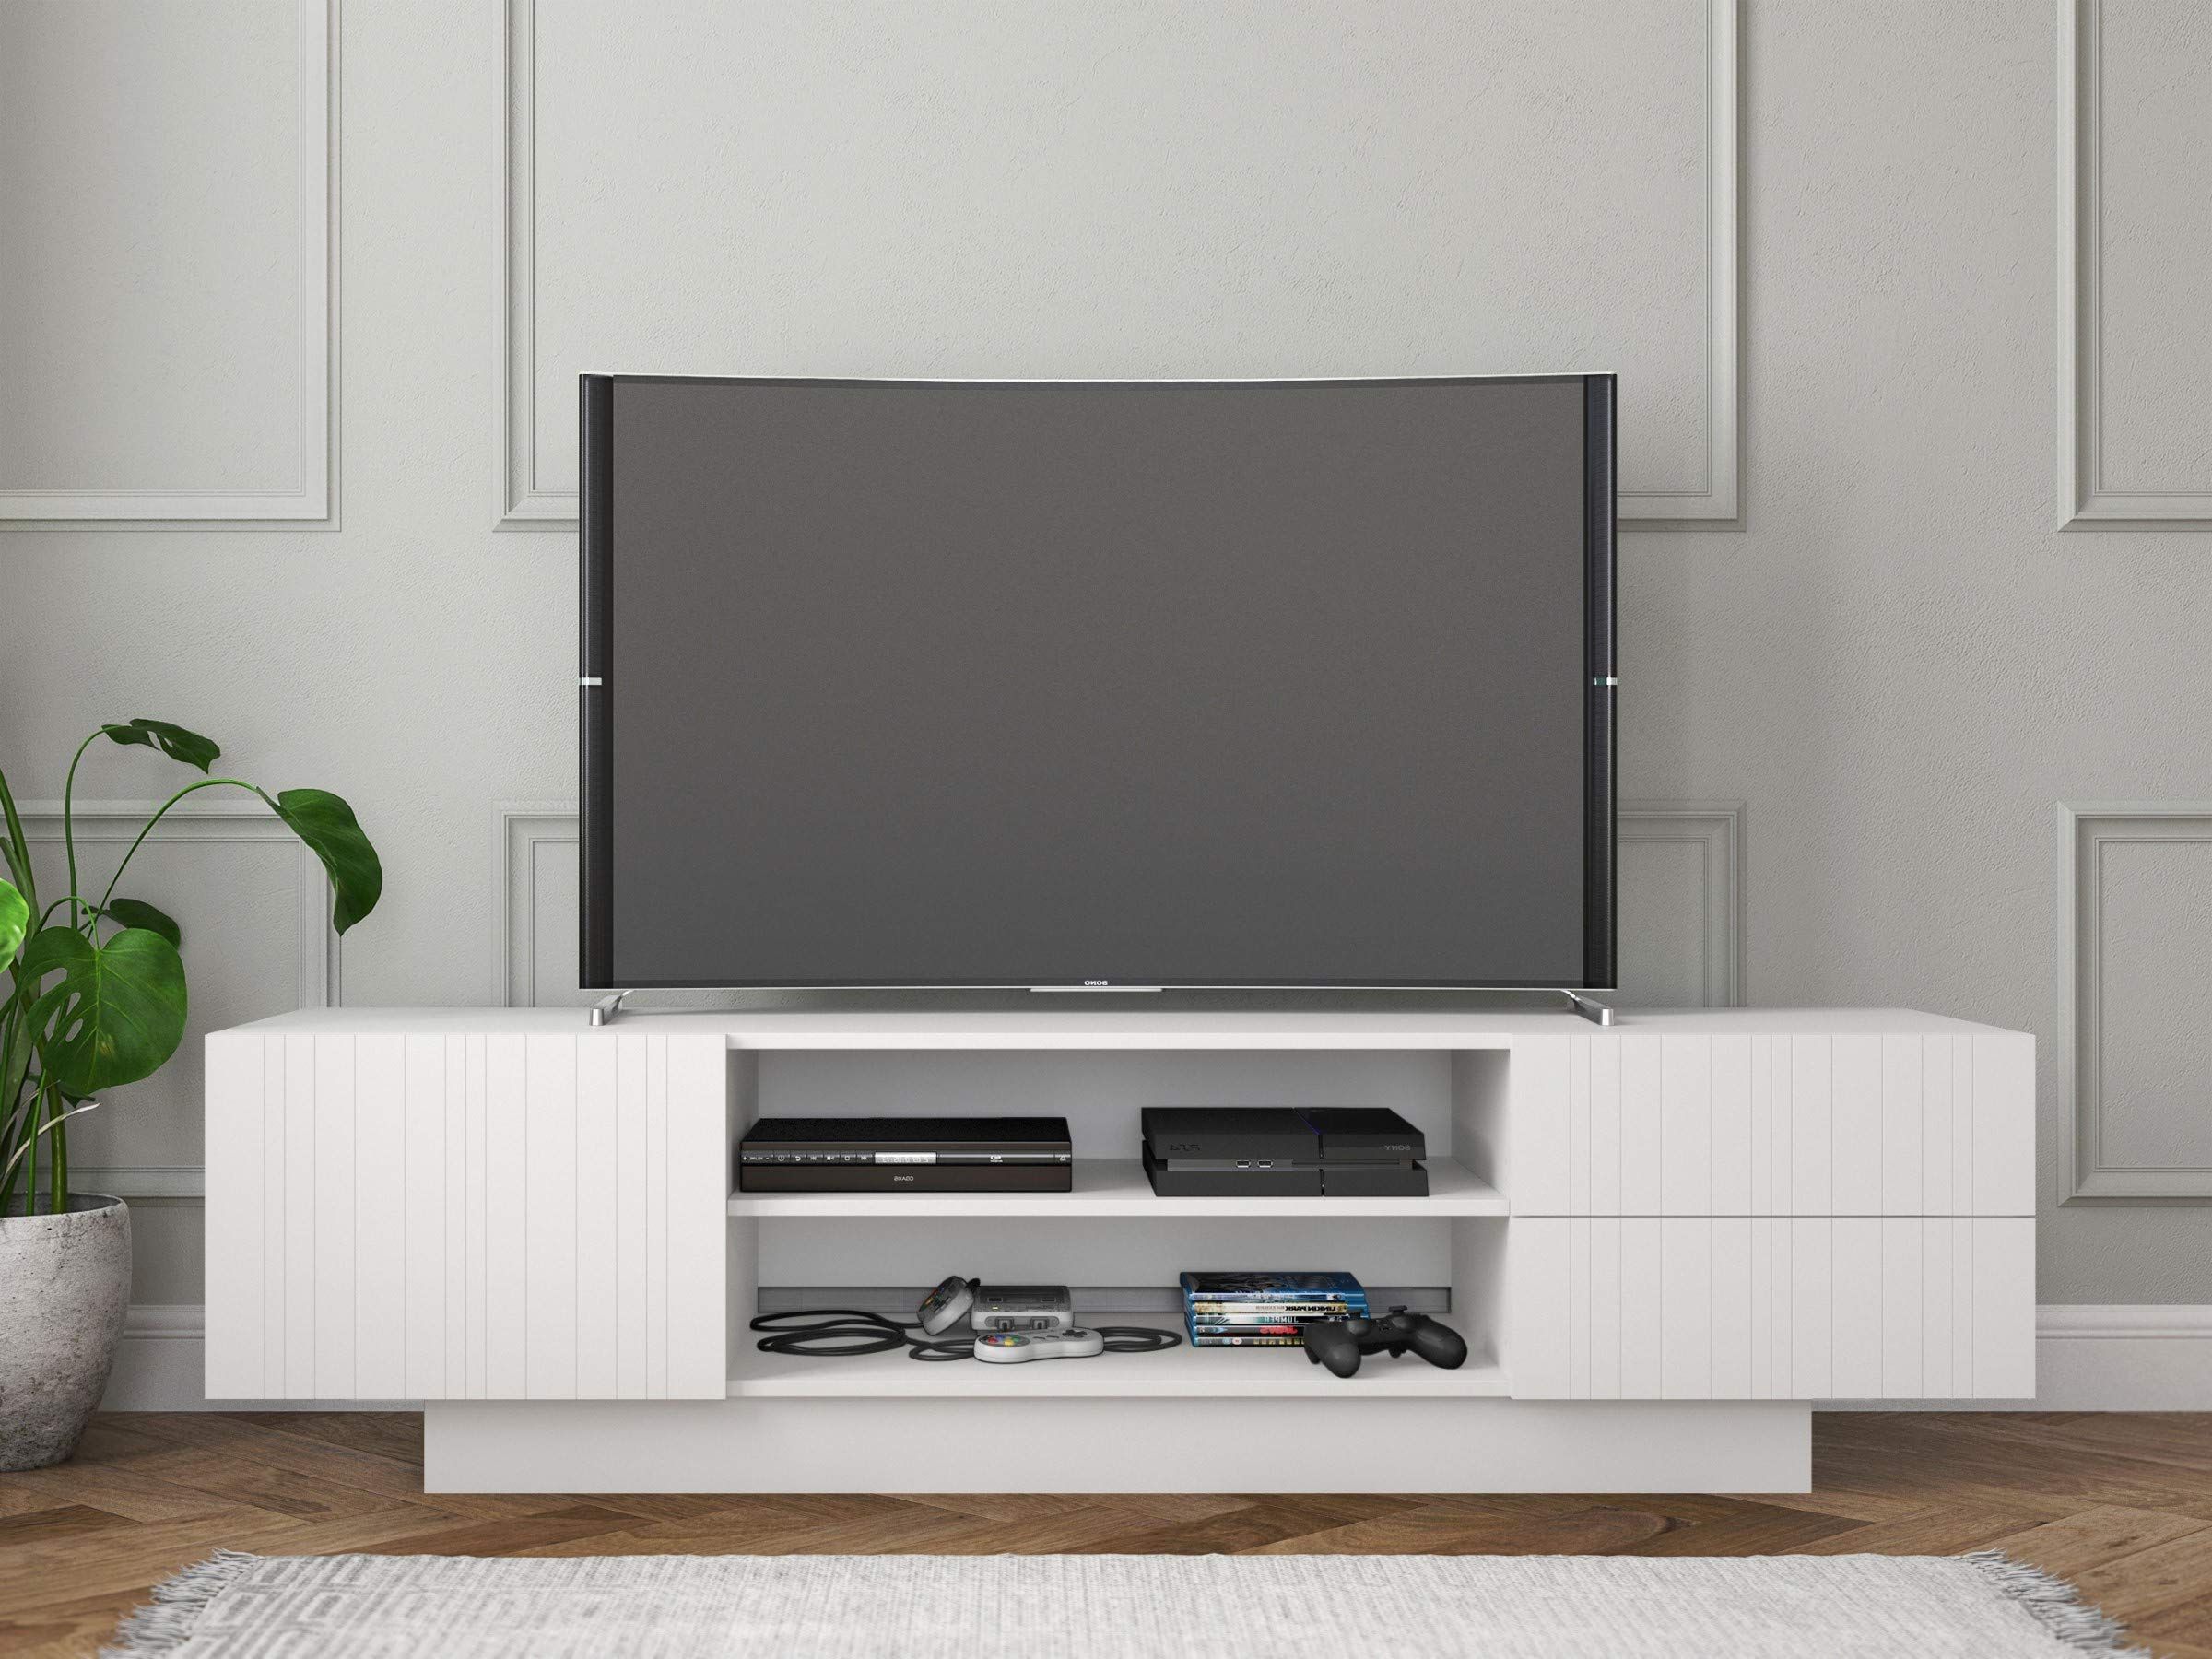 Preferred Marble Melamine Tv Stands For Amazon: Nexera Marble, White 72 Inch Tv Stand, White Matte Lacquer And  White Melamine, : Home & Kitchen (View 3 of 10)